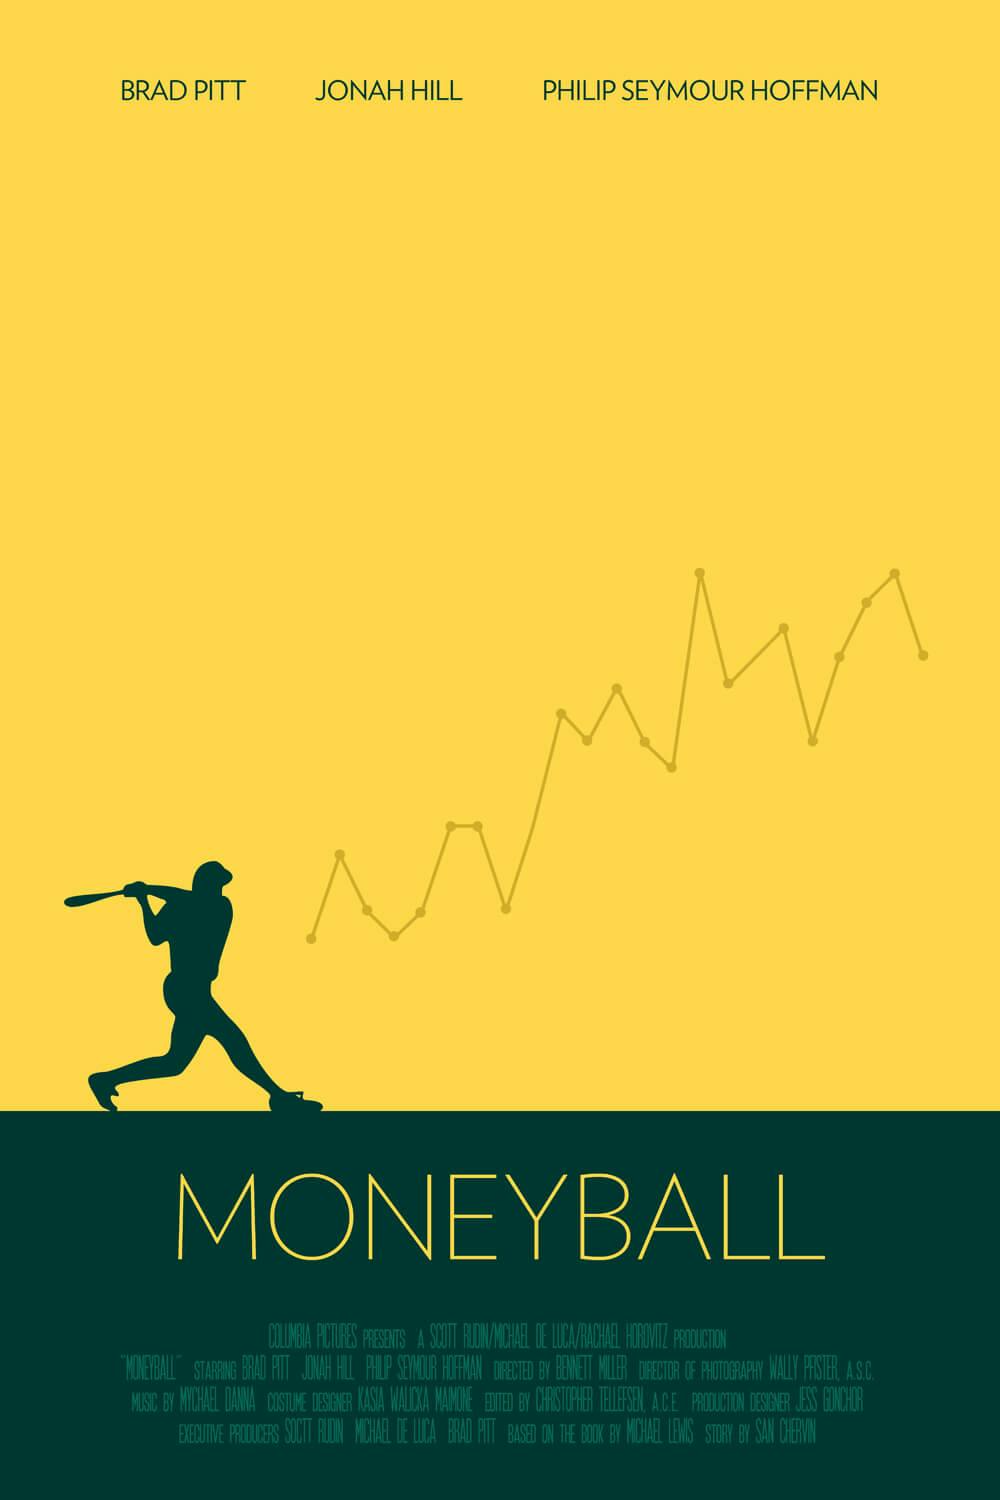 A poster for the movie Moneyball